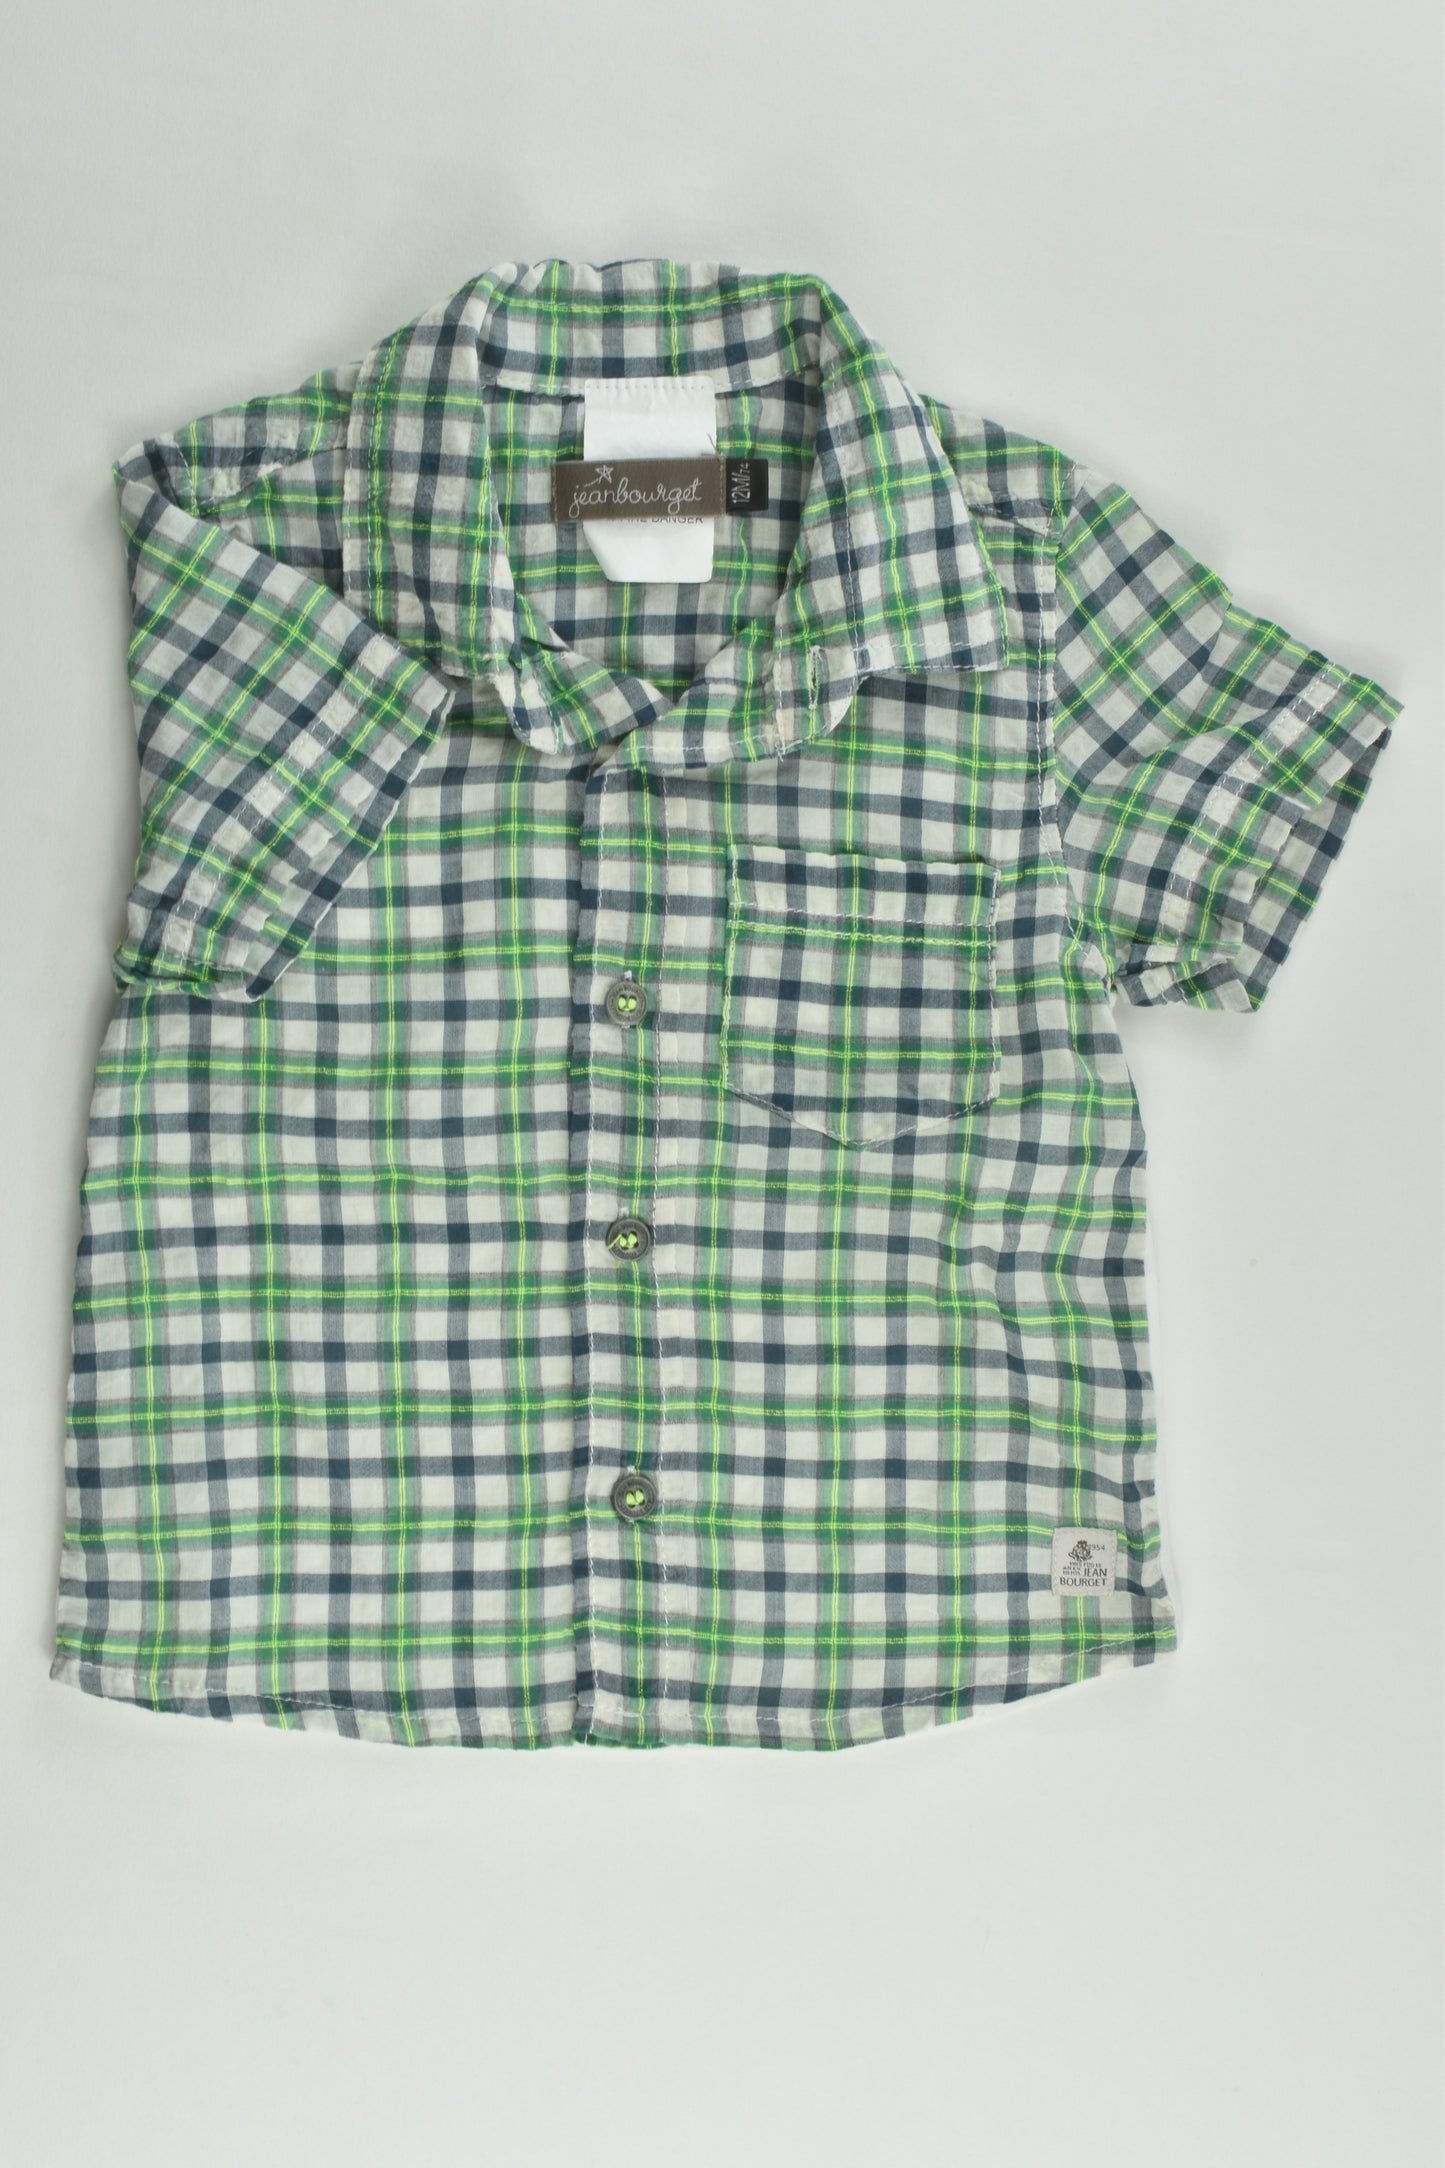 Jean Bourget Size 0 (12 months, 74 cm) 'On The Rock' Zebras/Checked Shirt